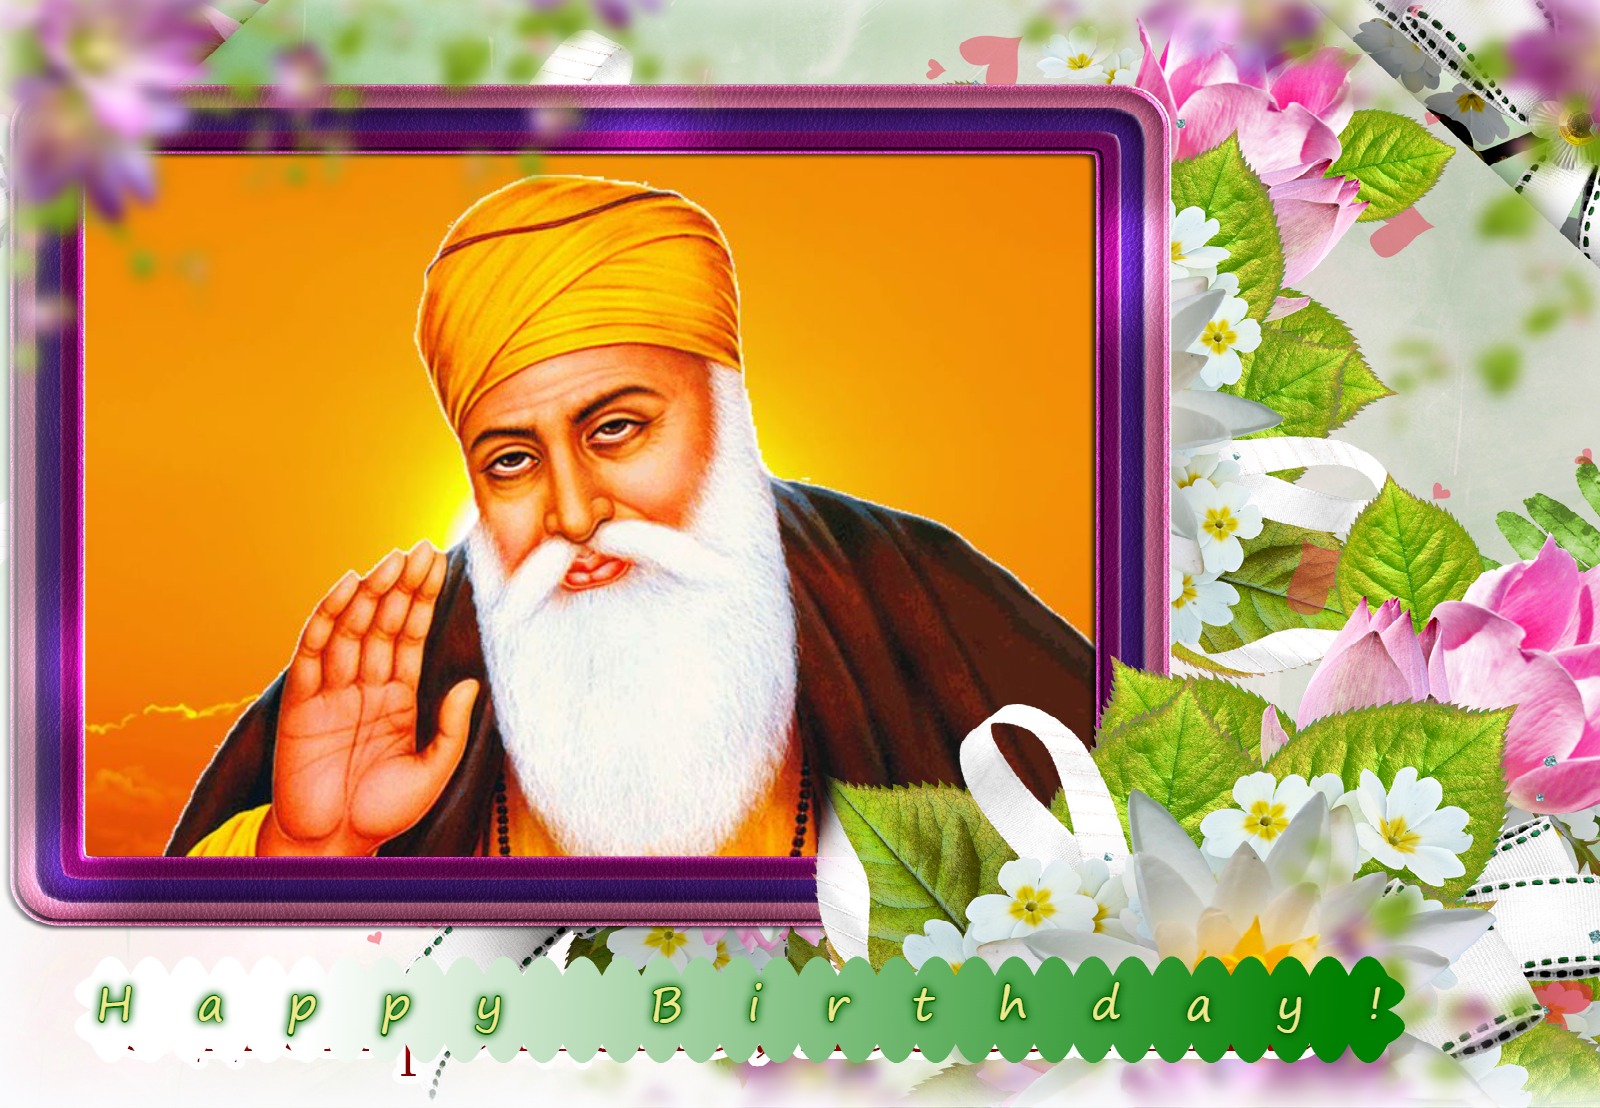 You are currently viewing “On The Eve Of Guru Nanak Birthday at Golden Temple”